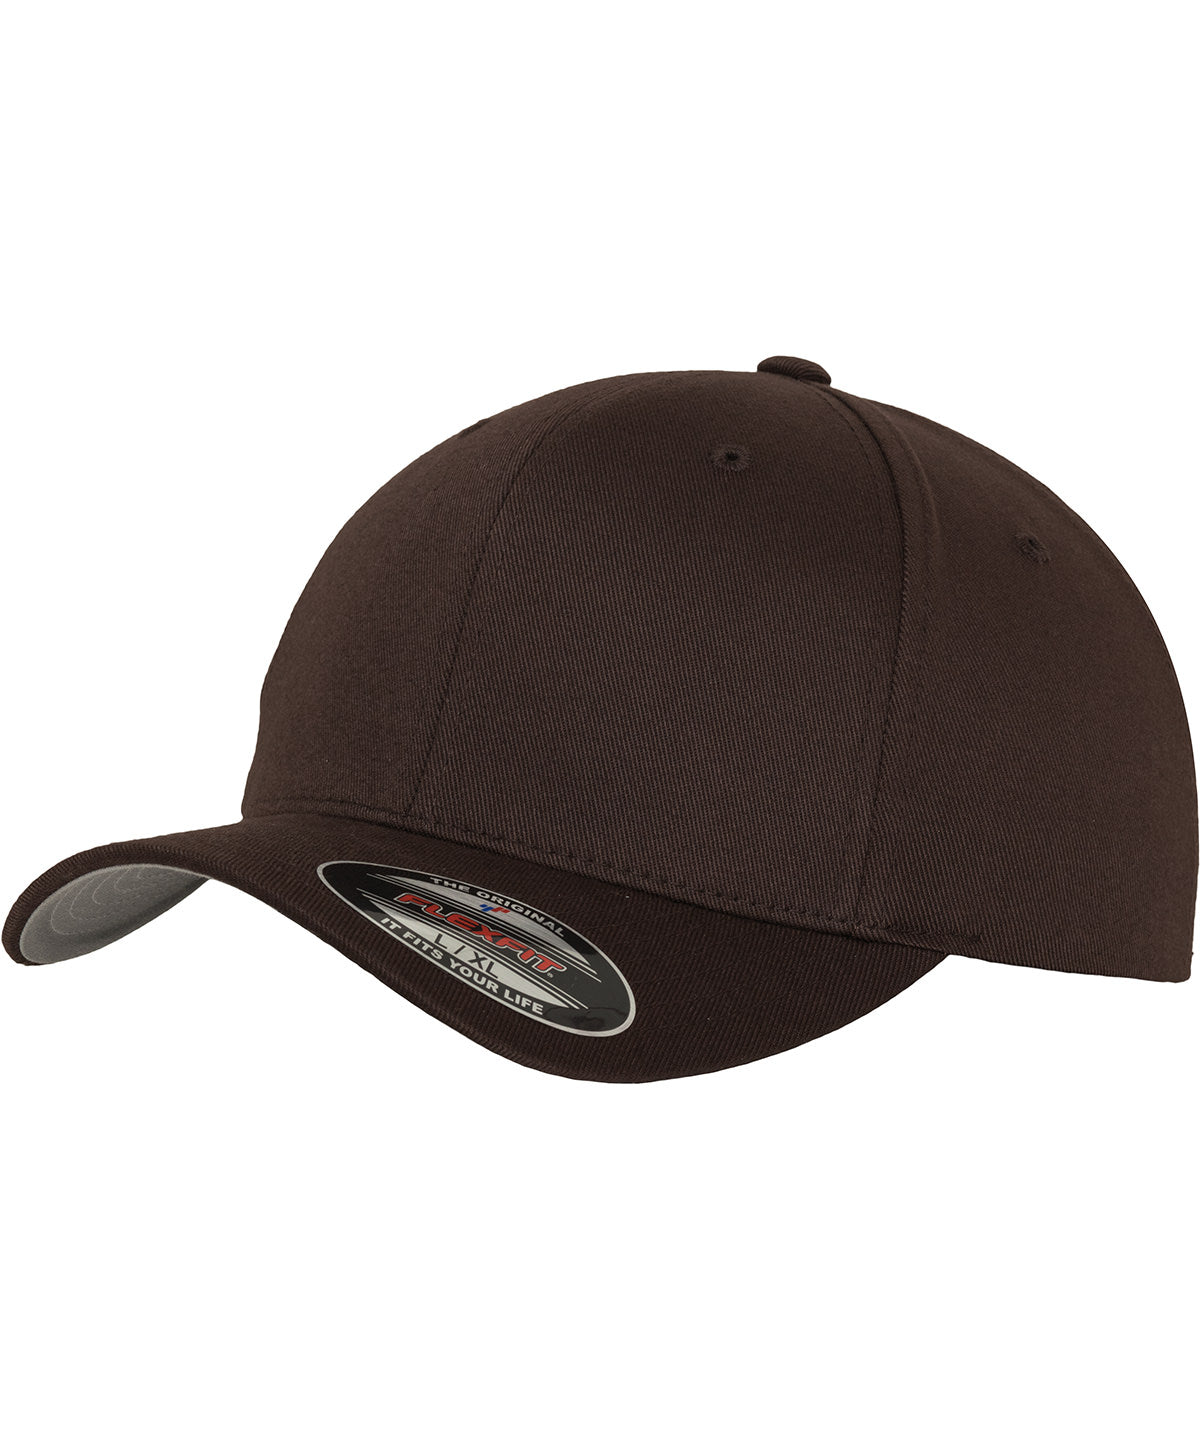 Brown - Flexfit fitted baseball cap (6277) Caps Flexfit by Yupoong 2022 Spring Edit, Headwear, Must Haves, New Colours for 2023, Rebrandable, Summer Accessories Schoolwear Centres